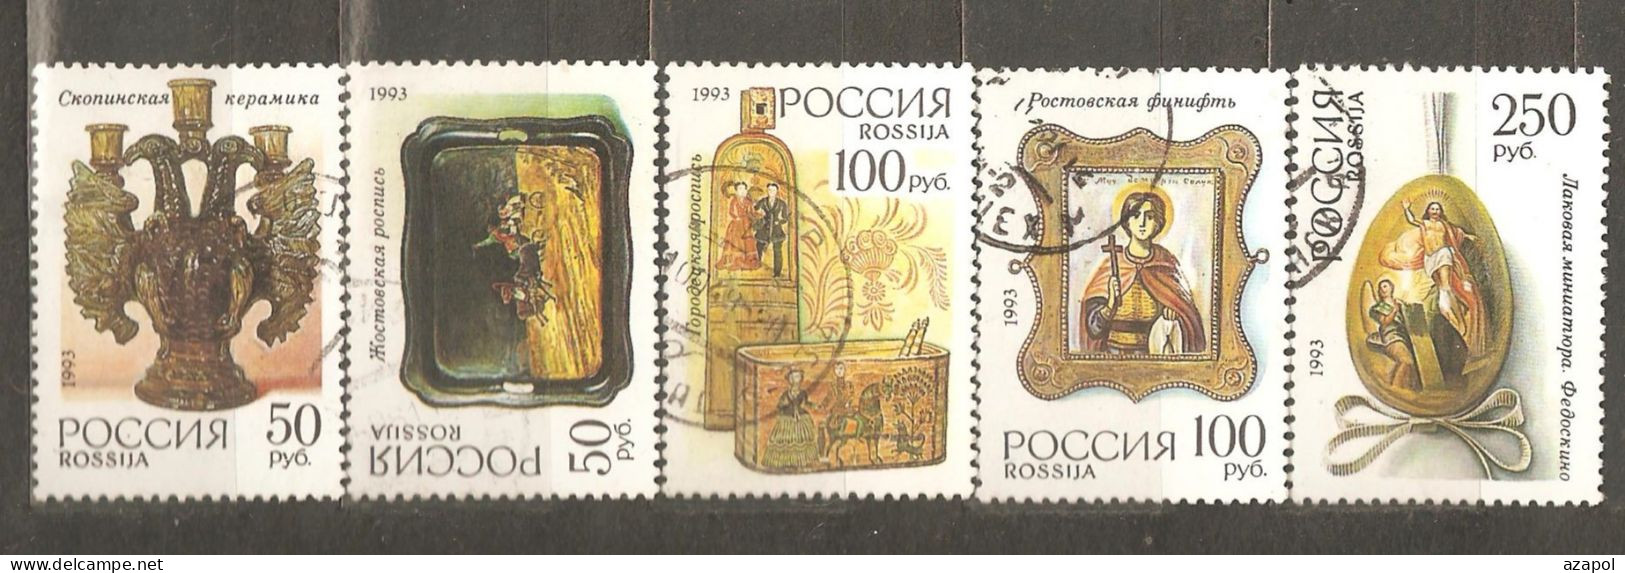 Russia: Full Set Of 5 Used Stamps,  Traditional Art - Museums, 1993, Mi#328-32 - Used Stamps